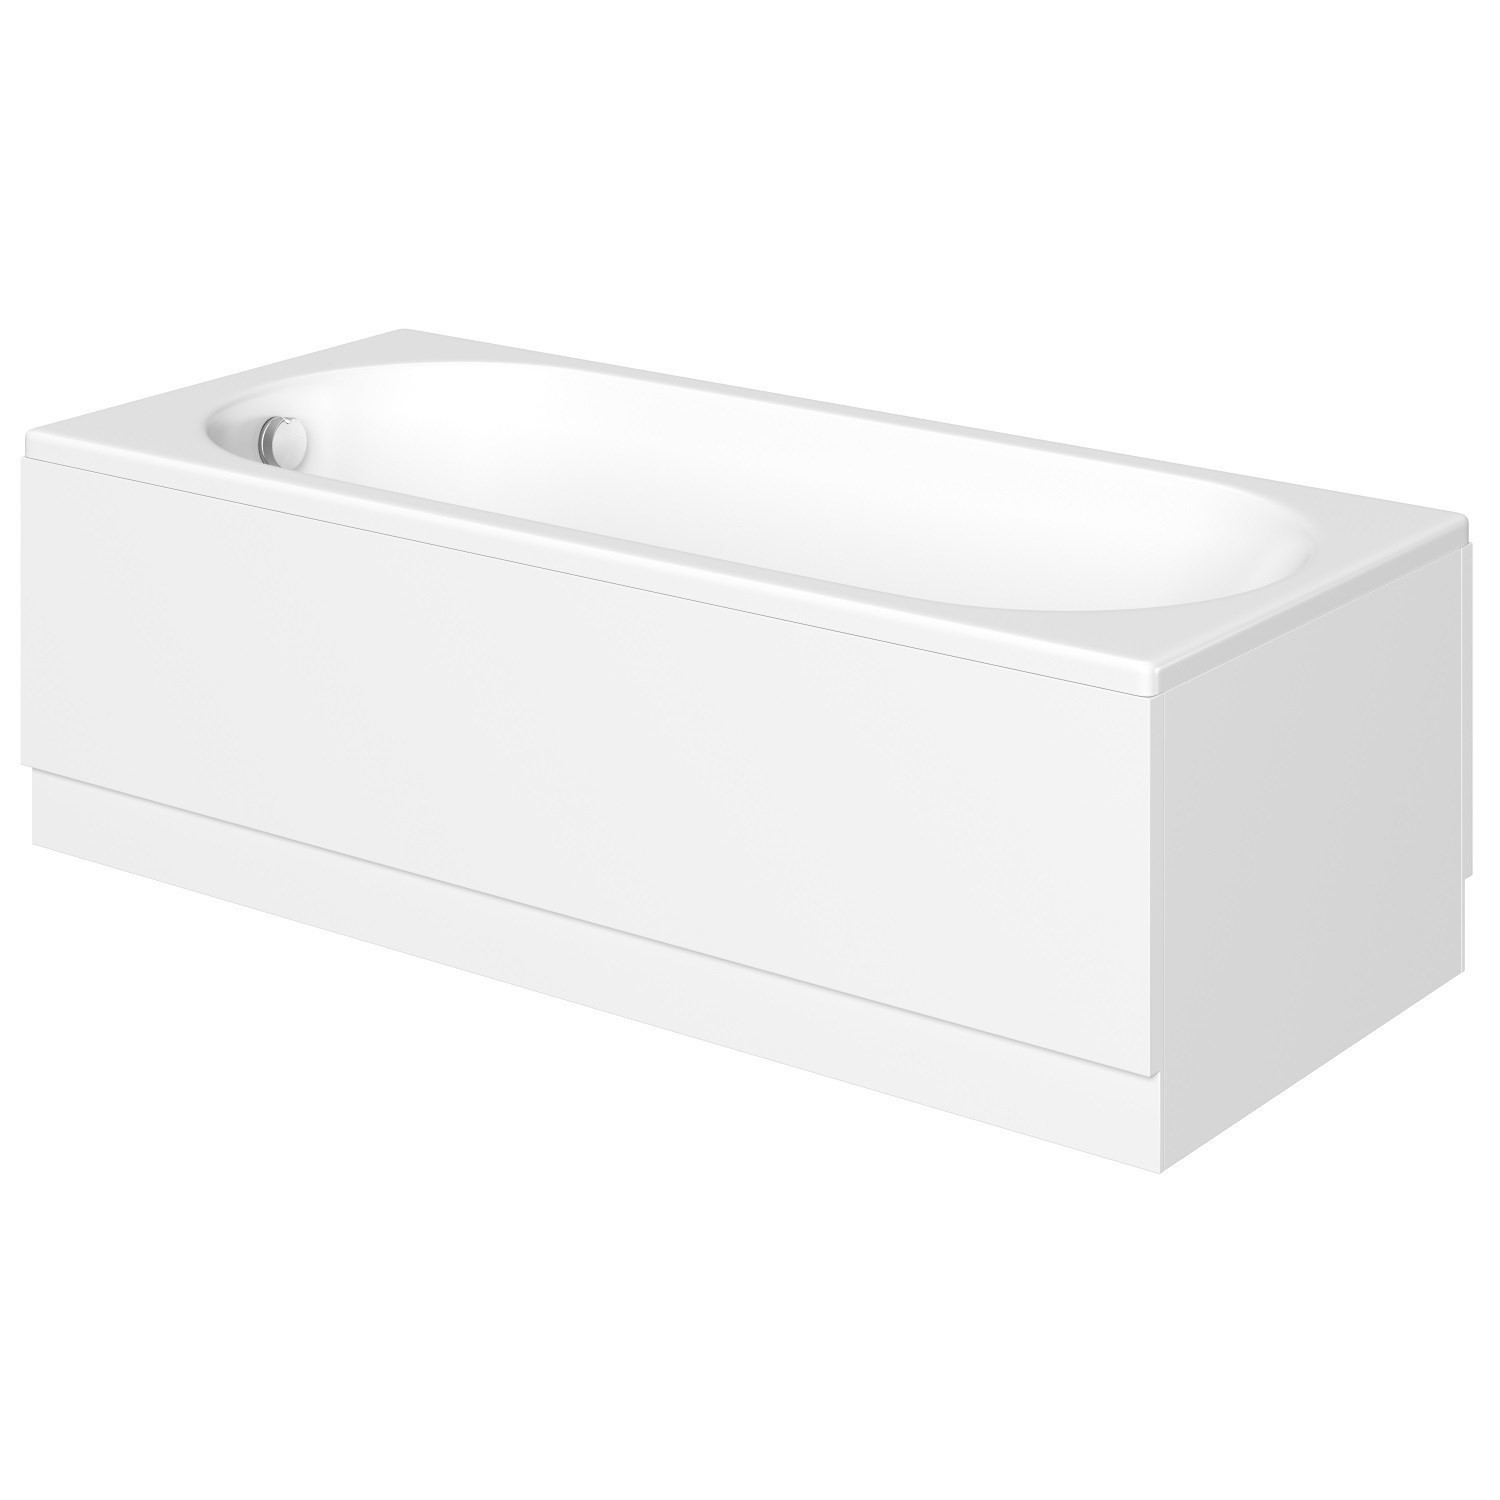 1600mm Acrylic Bath Front Panel with Plinth - Supastyle